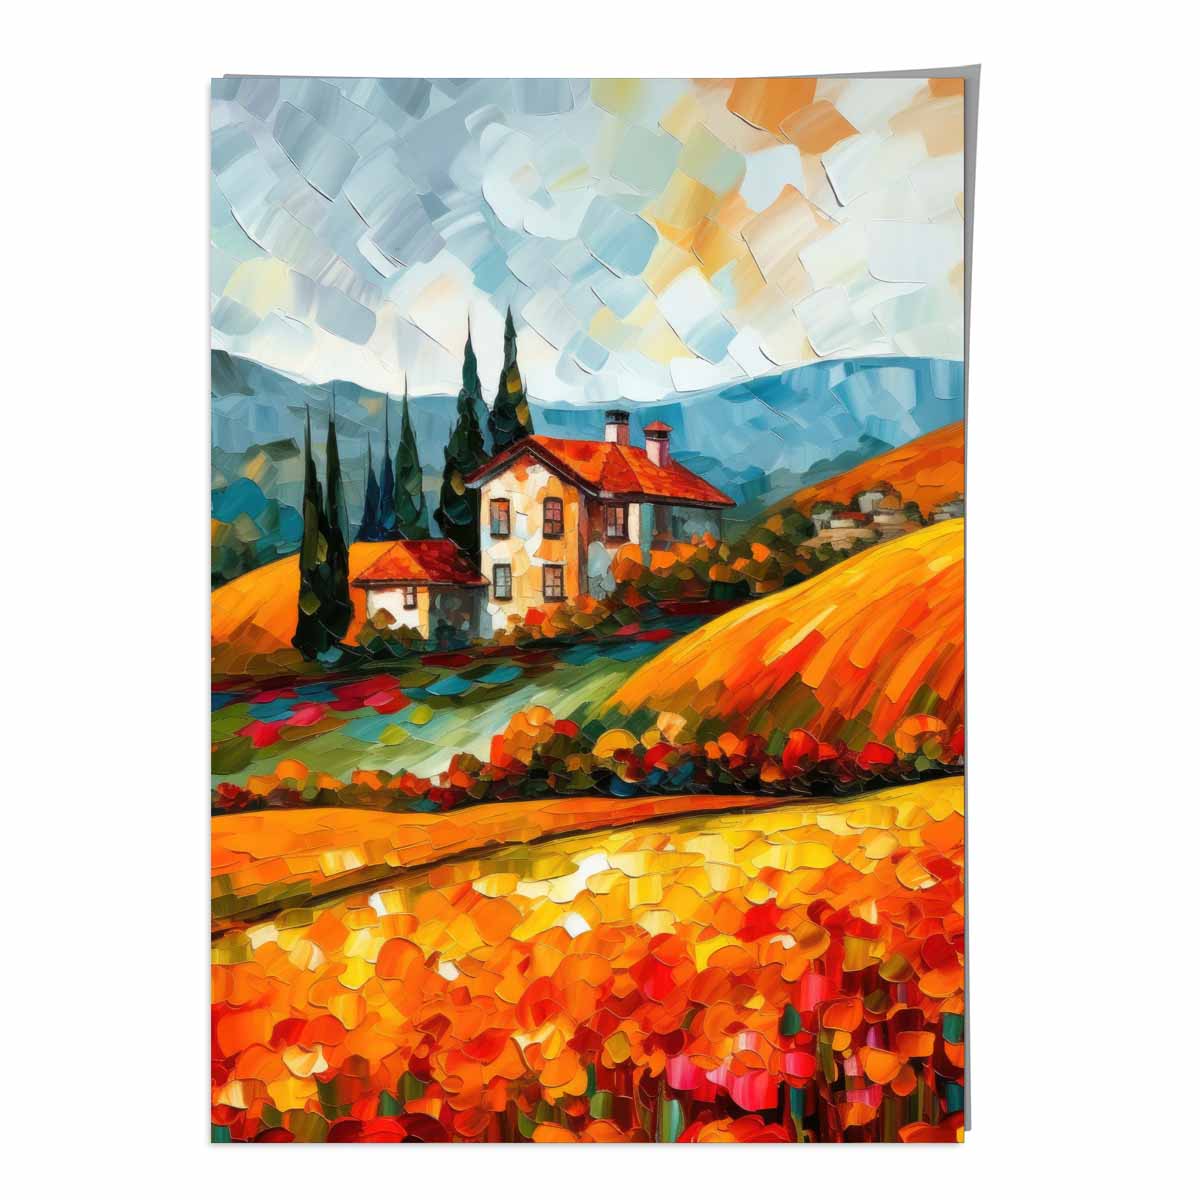 Red Fields Farmhouse Landscape Abstract Painting Art Print